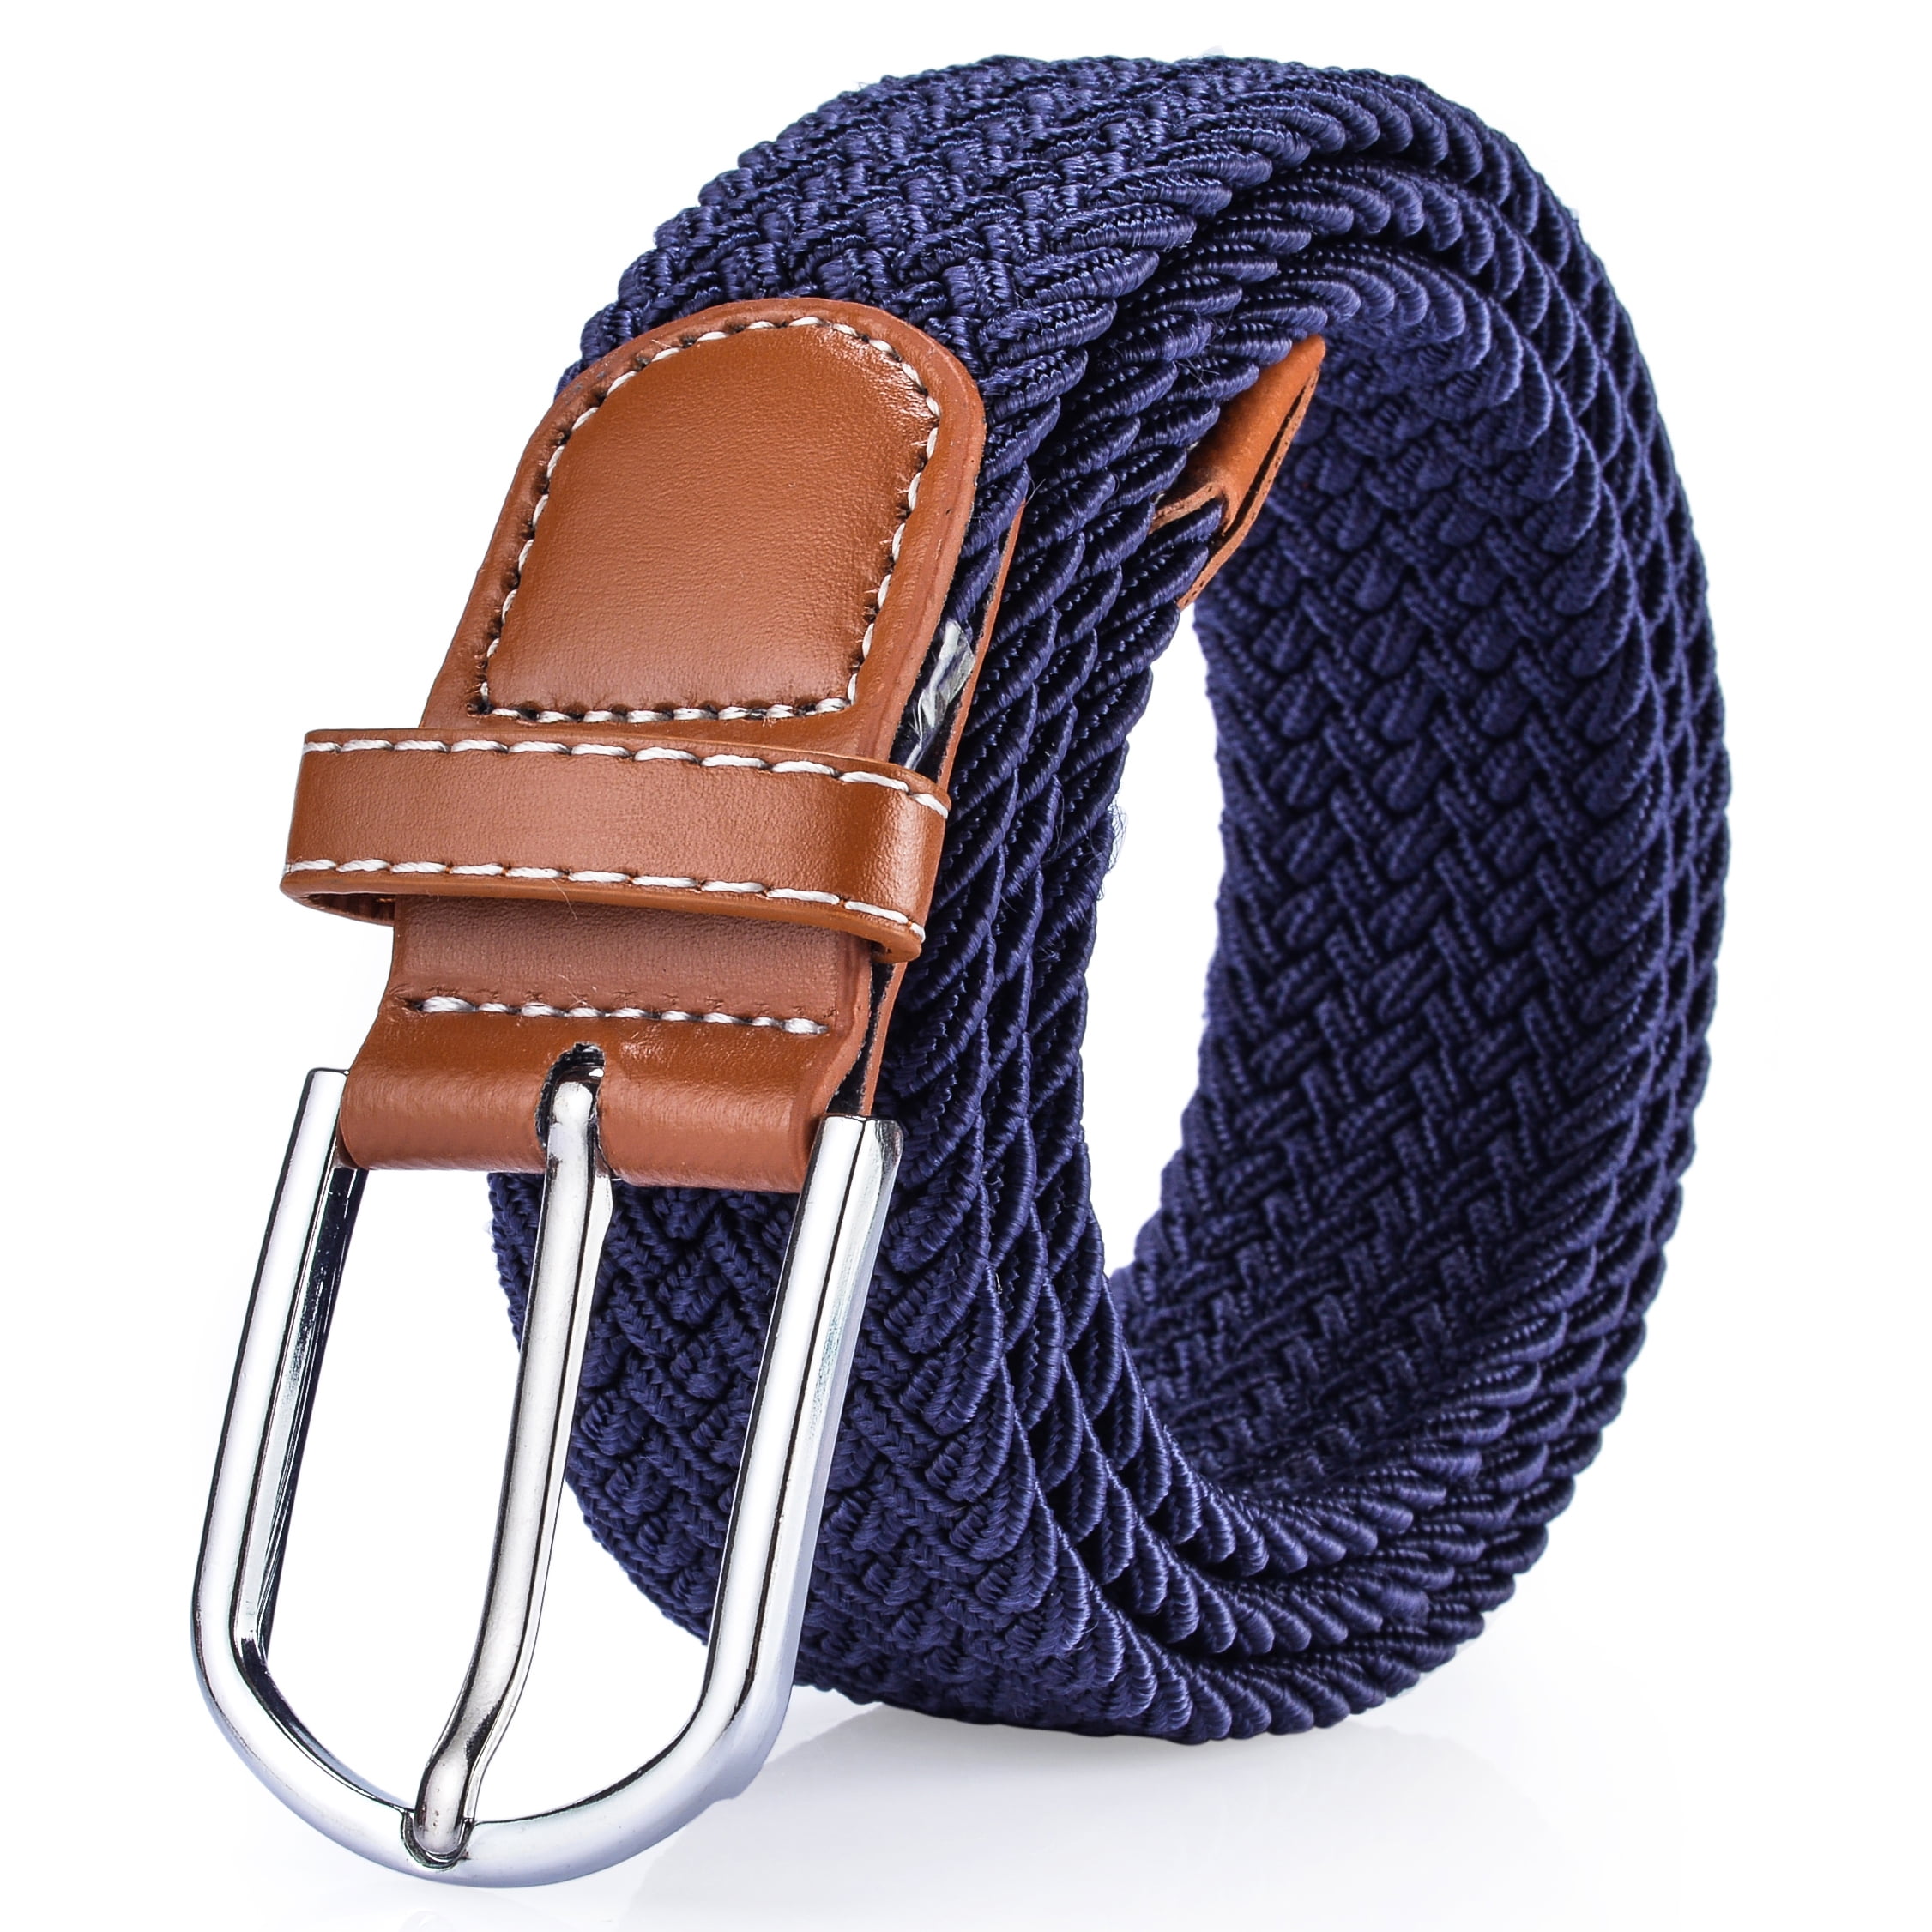 As You Like It - Women's Casual Belt Braided Polyester Elastic Stretch ...